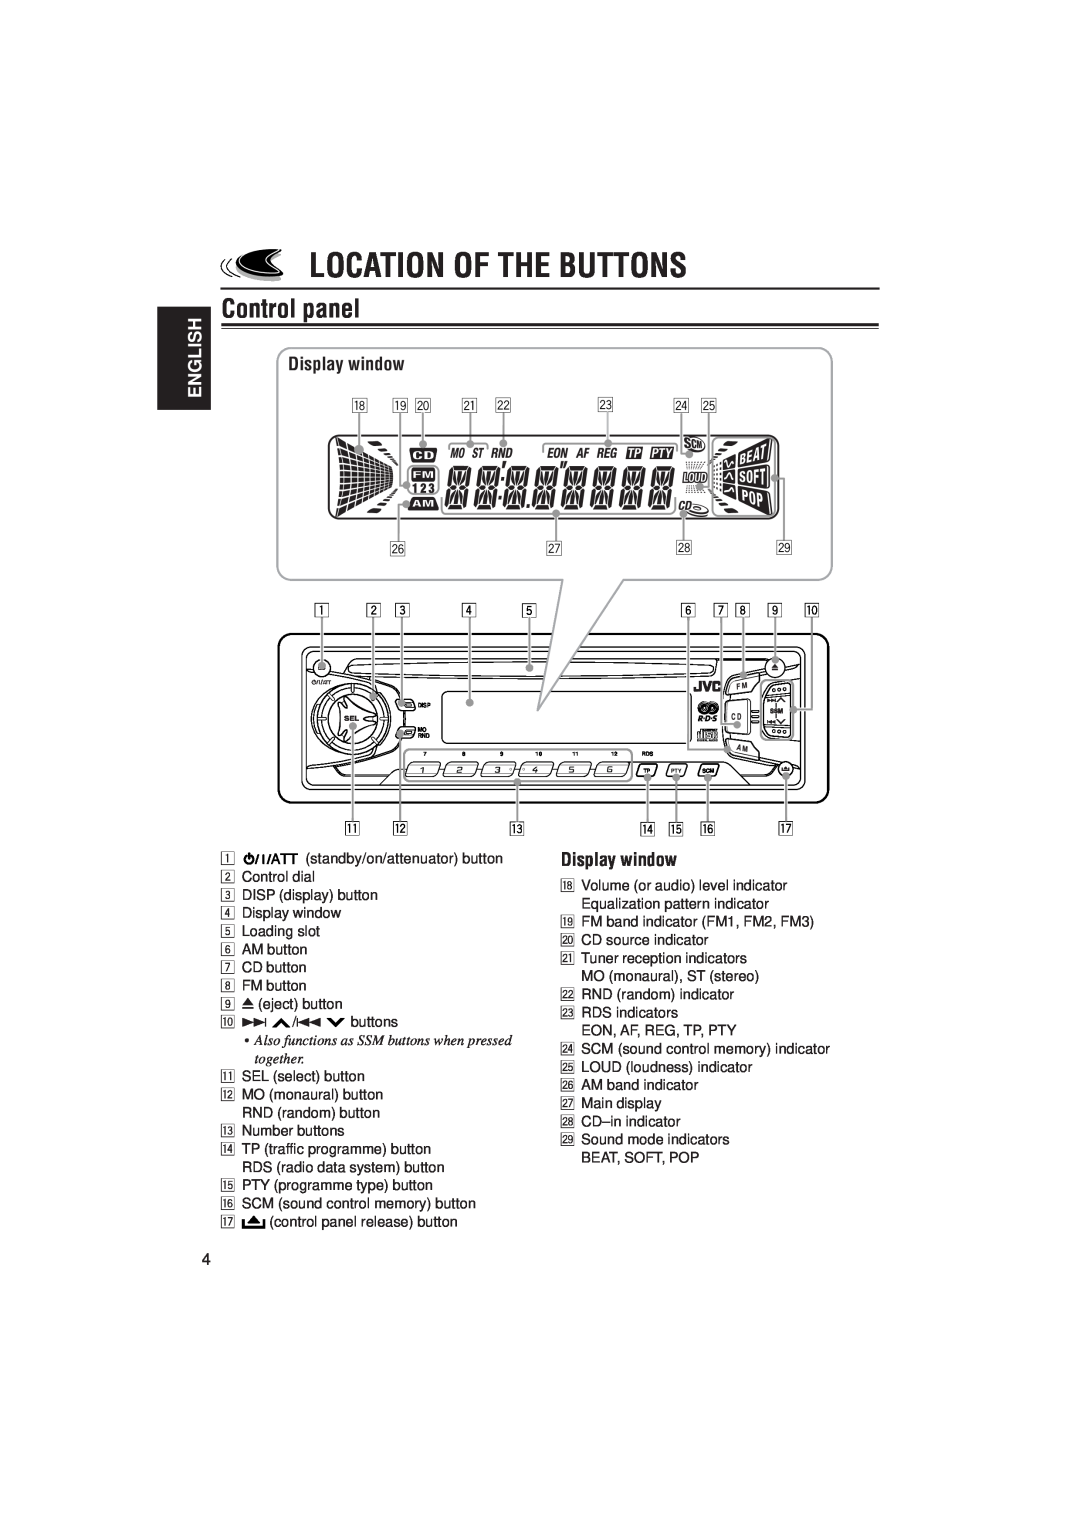 JVC KD-S733R, KD-S731R manual Location Of The Buttons, Control panel, Display window, English, i o a s, d f g 